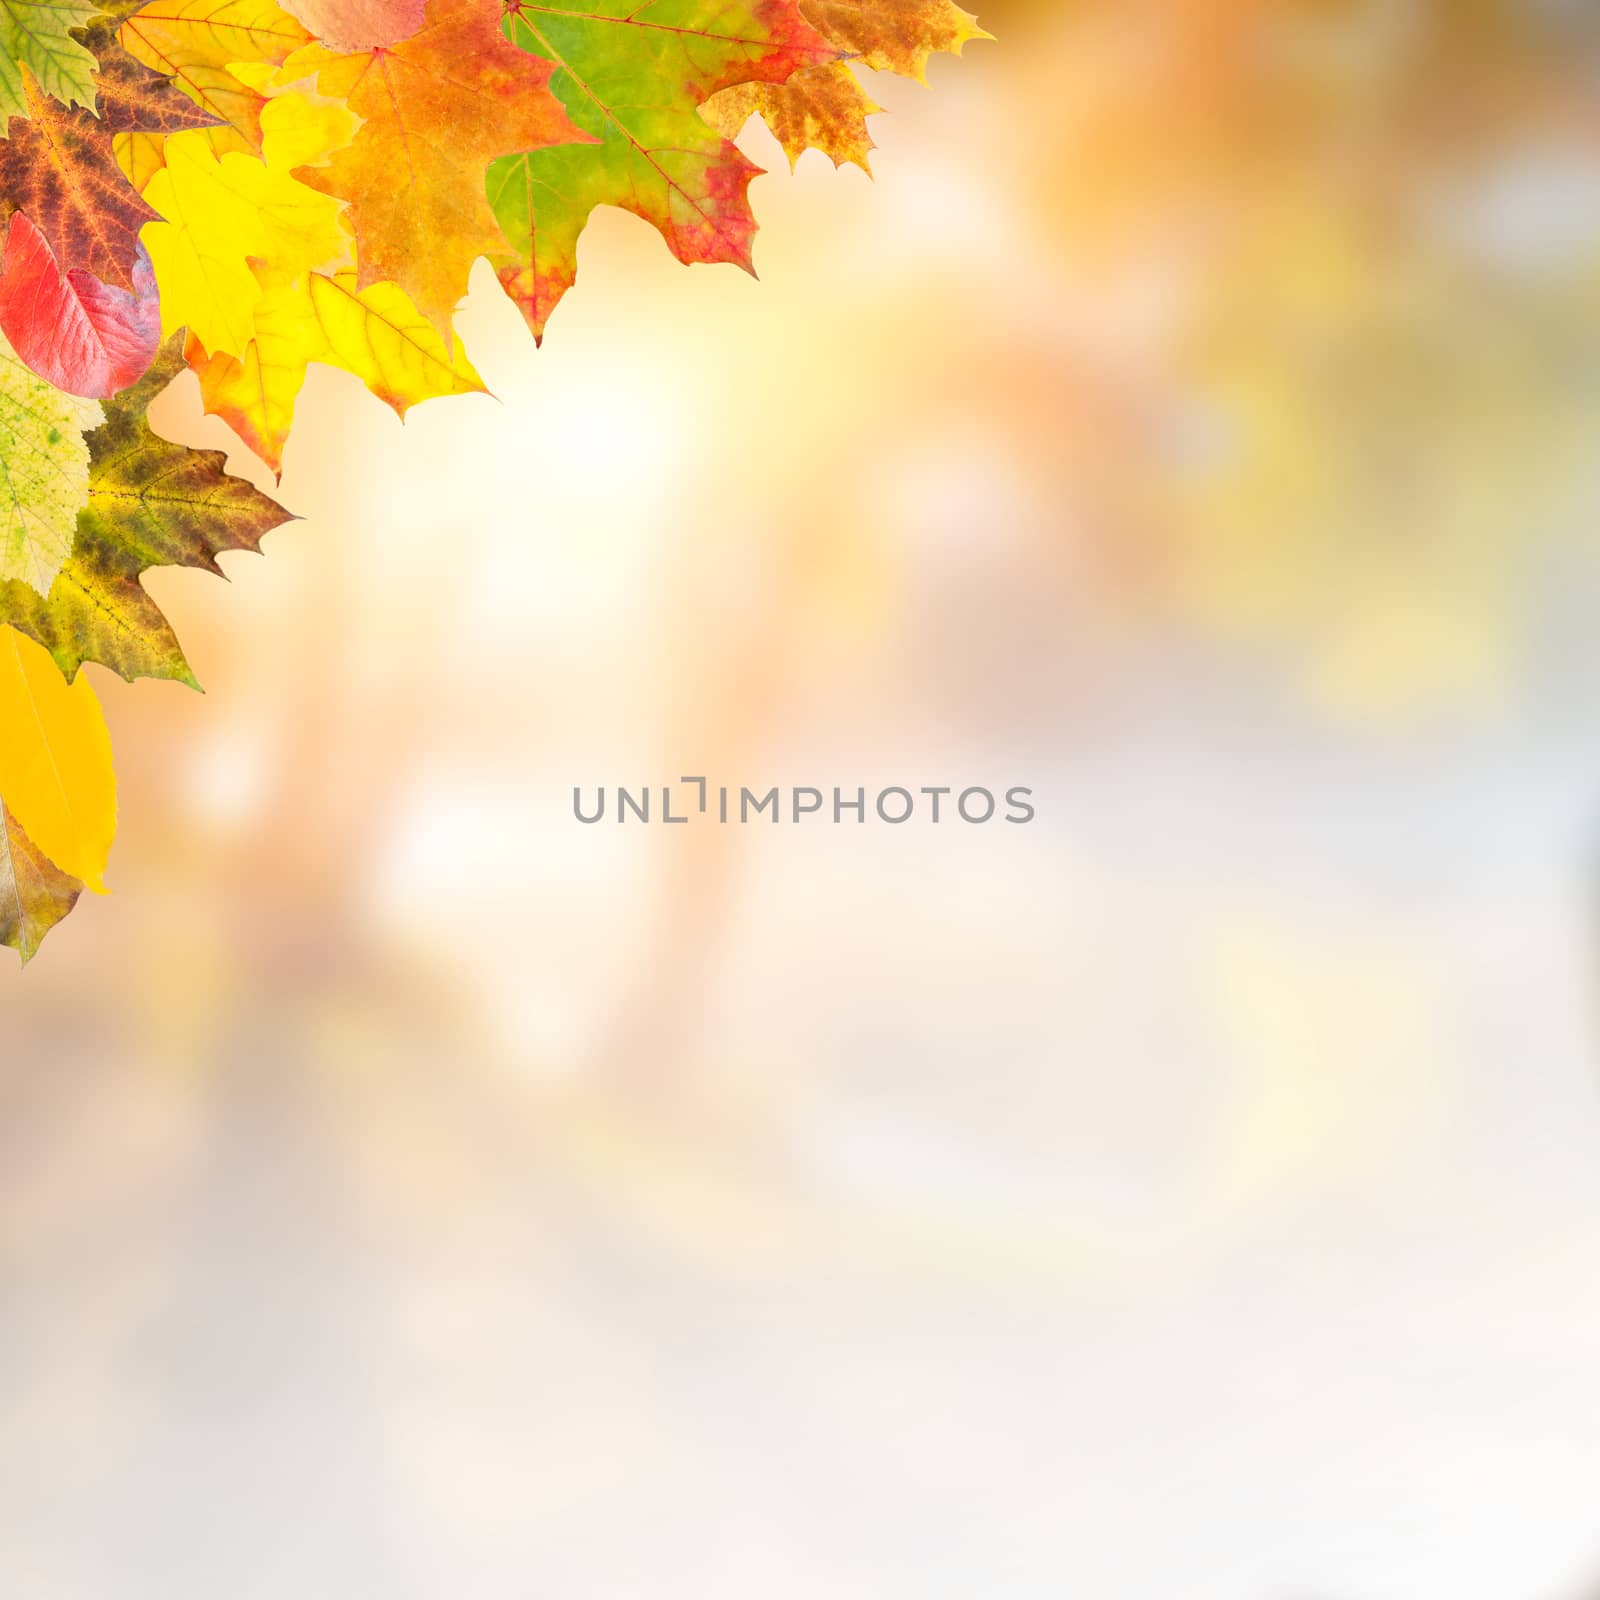 Autumn background with red, yellow and orange foliage